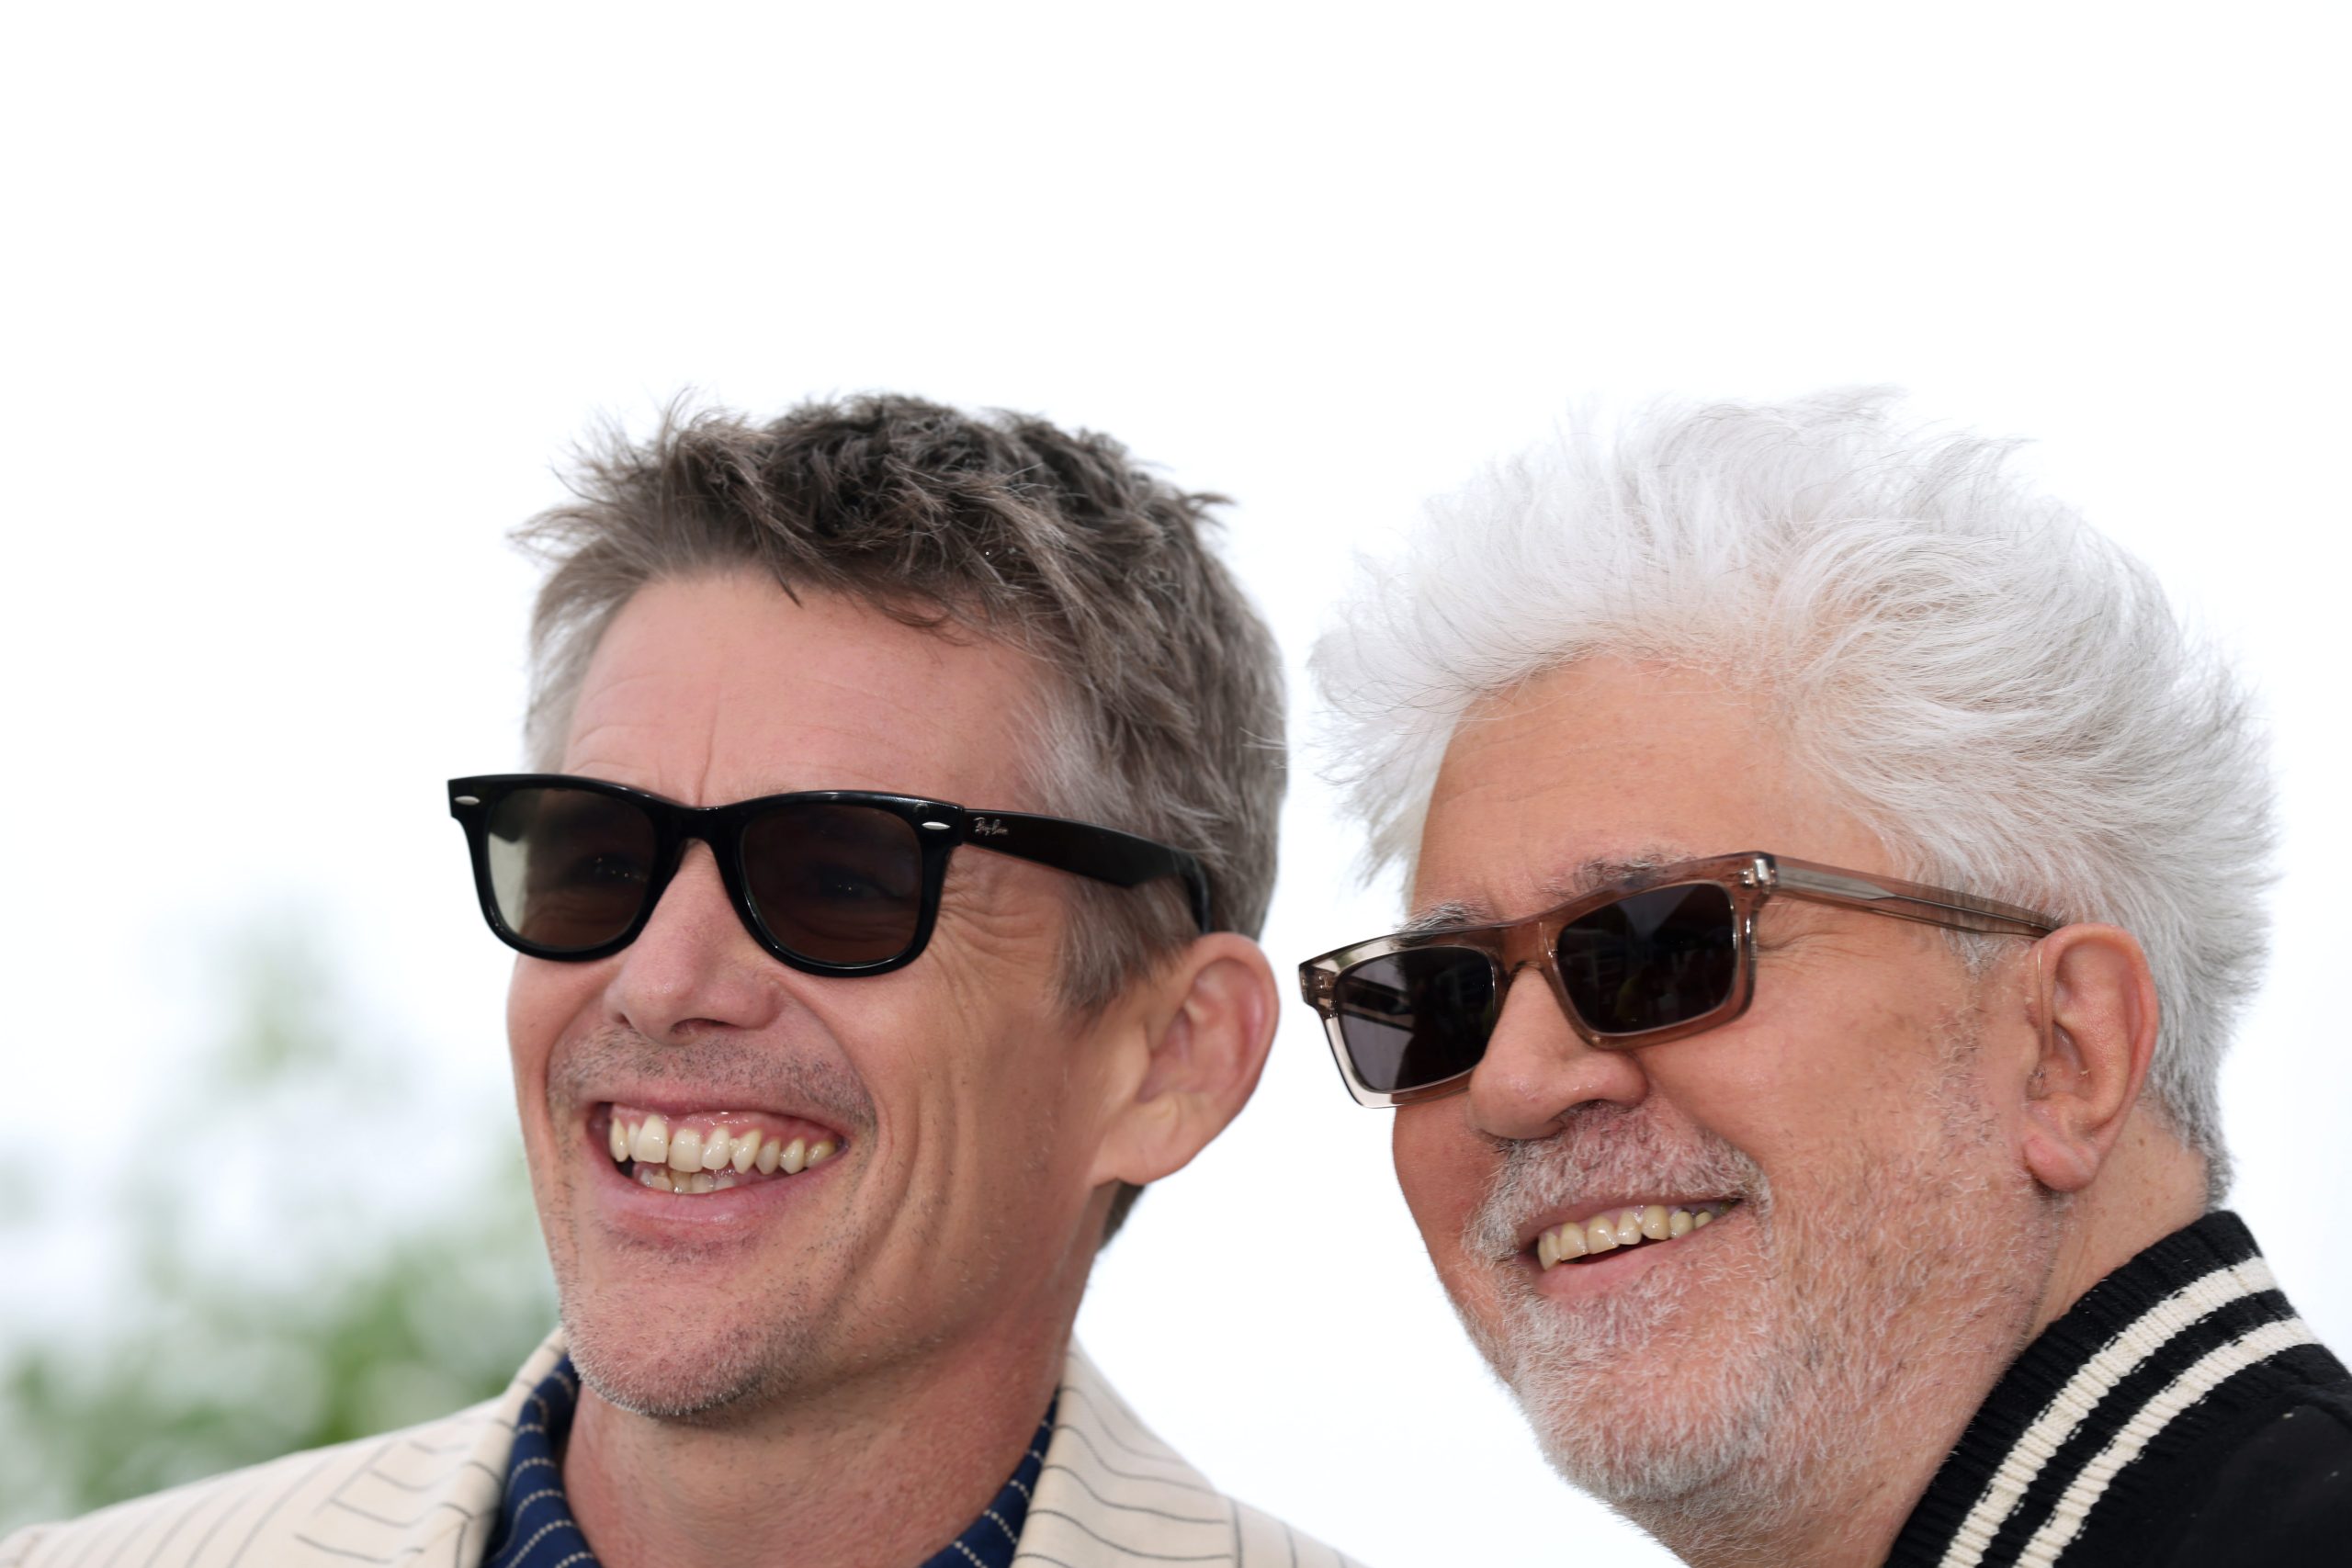 epa10633849 US actor Ethan Hawke and Spanish filmmaker Pedro Almodovar attend the photocall for 'Extrana forma de vida' (Strange Way of Life) during the 76th annual Cannes Film Festival, in Cannes, France, 17 May 2023. The festival runs from 16 to 27 May.  EPA/MOHAMMED BADRA